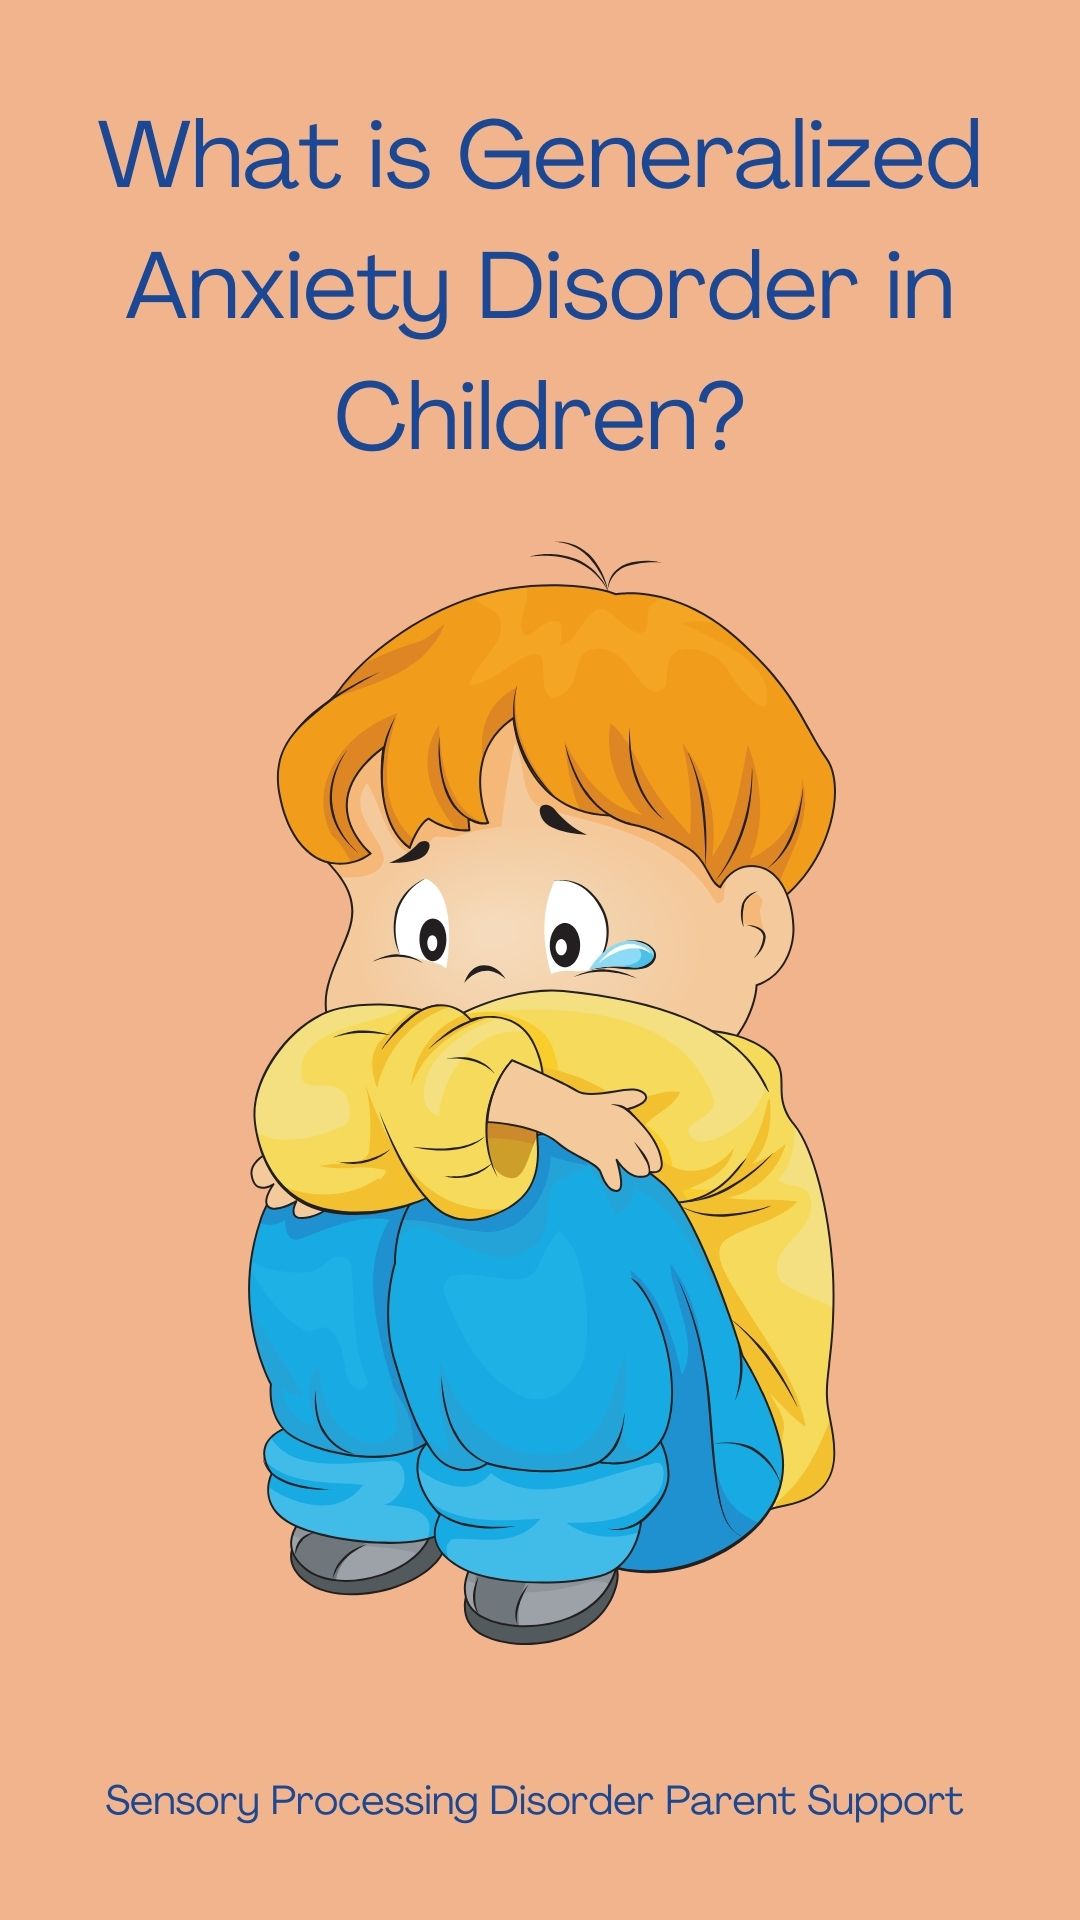 What is Generalized Anxiety Disorder in Children? (GAD)